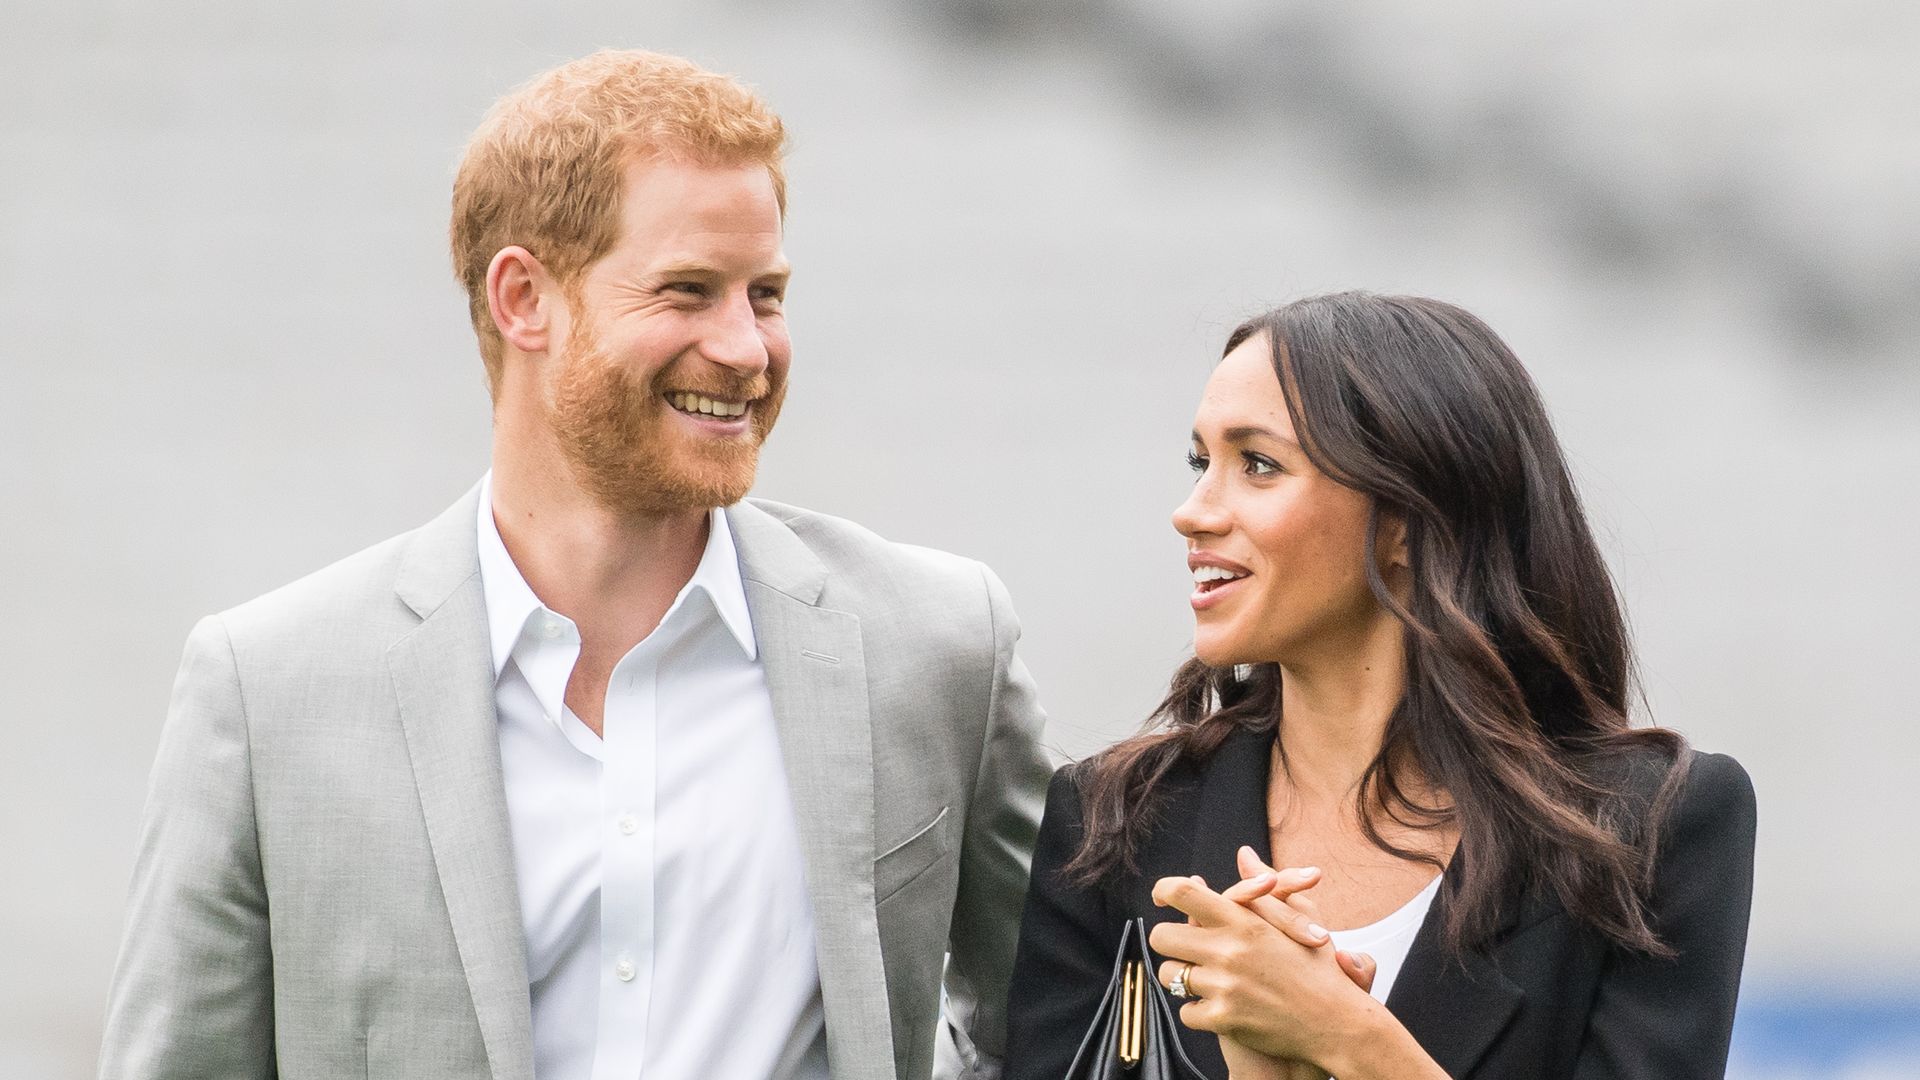 Meghan smiling at Harry in Ireland